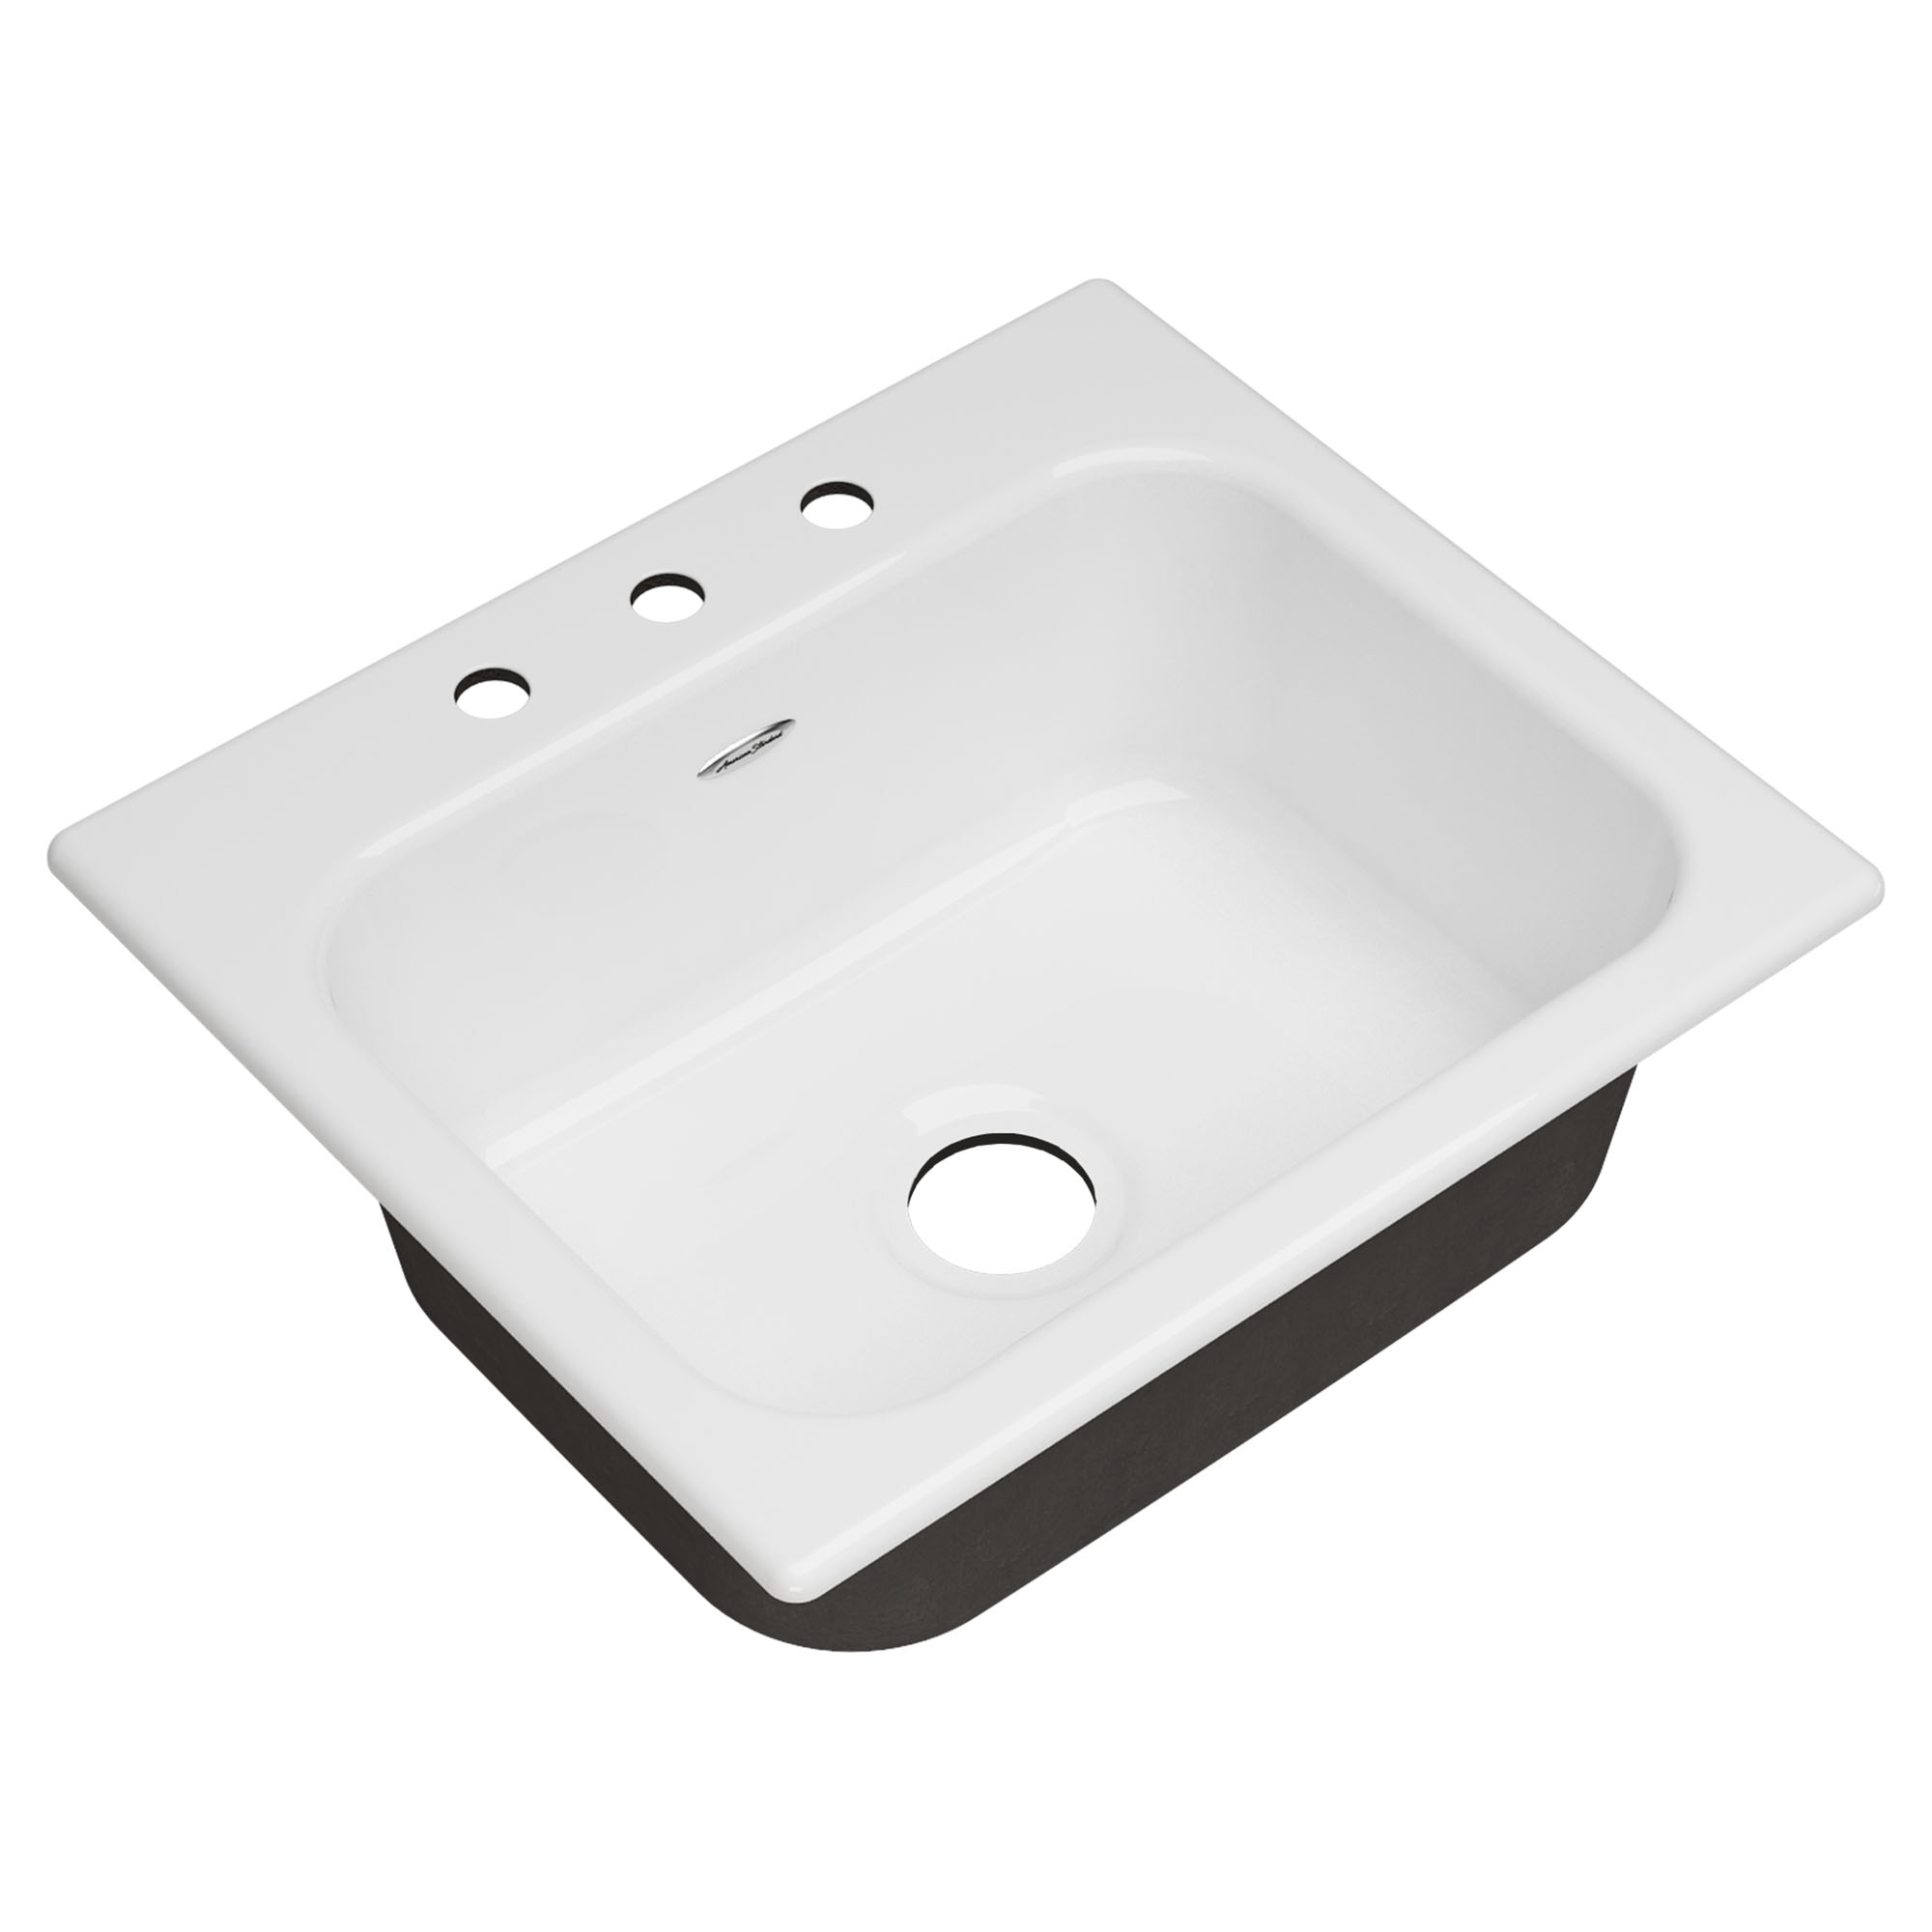 American Standard Quince Drop-in Cast Iron 25 in. 3-Hole Single Bowl Kitchen Sink in Brilliant White - image 2 of 6